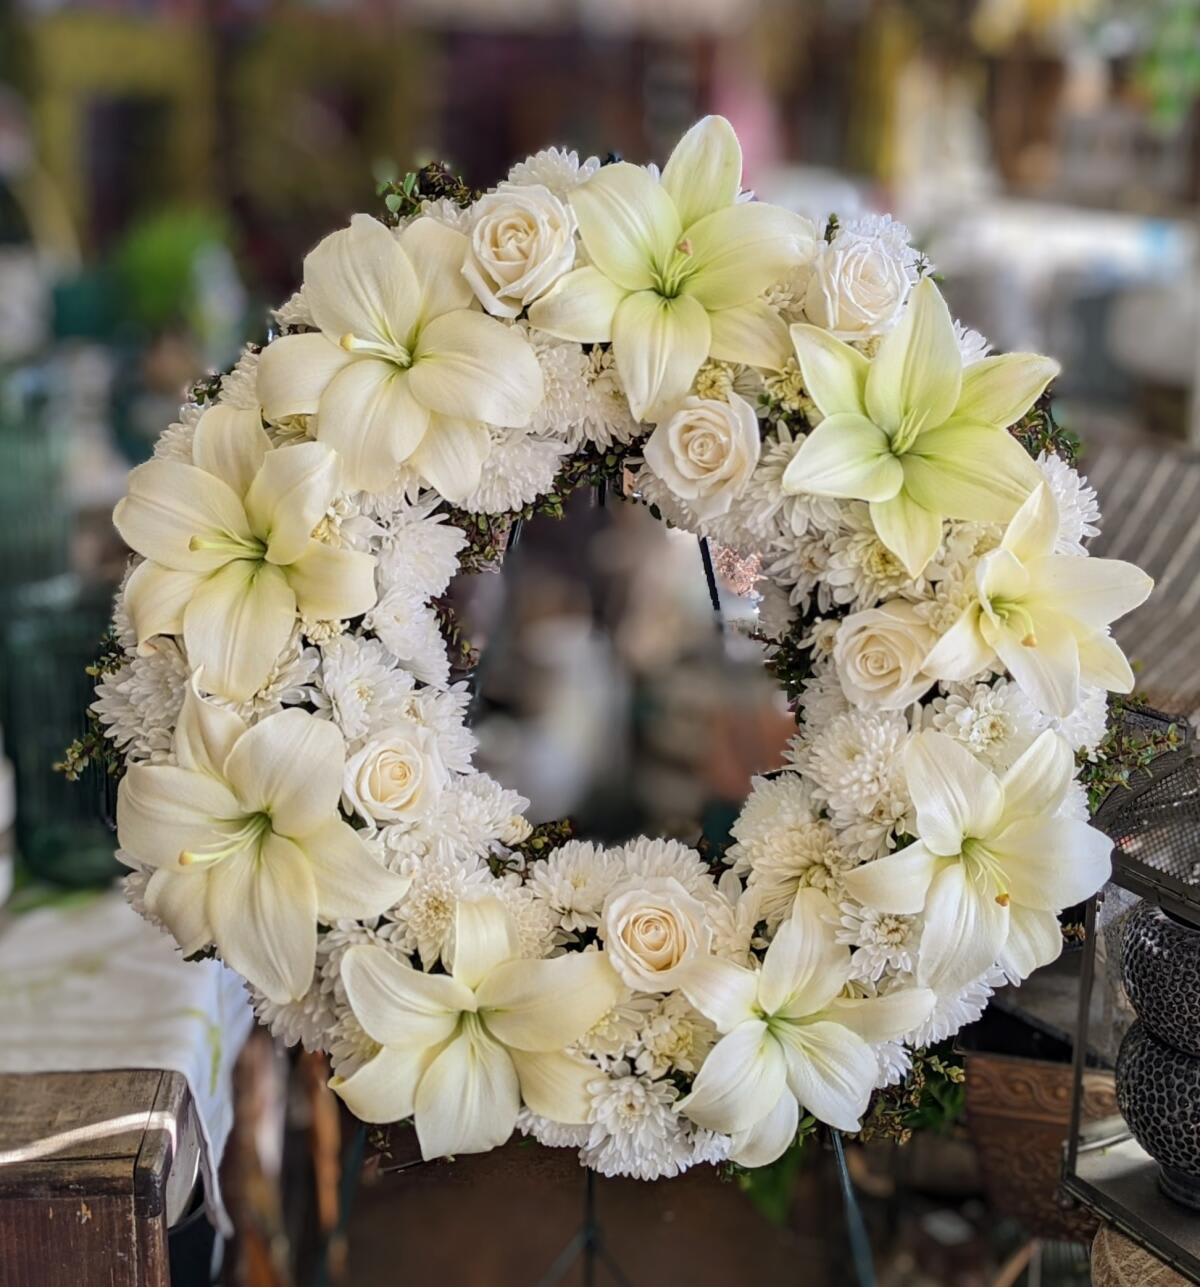 White Serenity Wreath - All white flowers that include lilies, chrysanthemums, and roses.